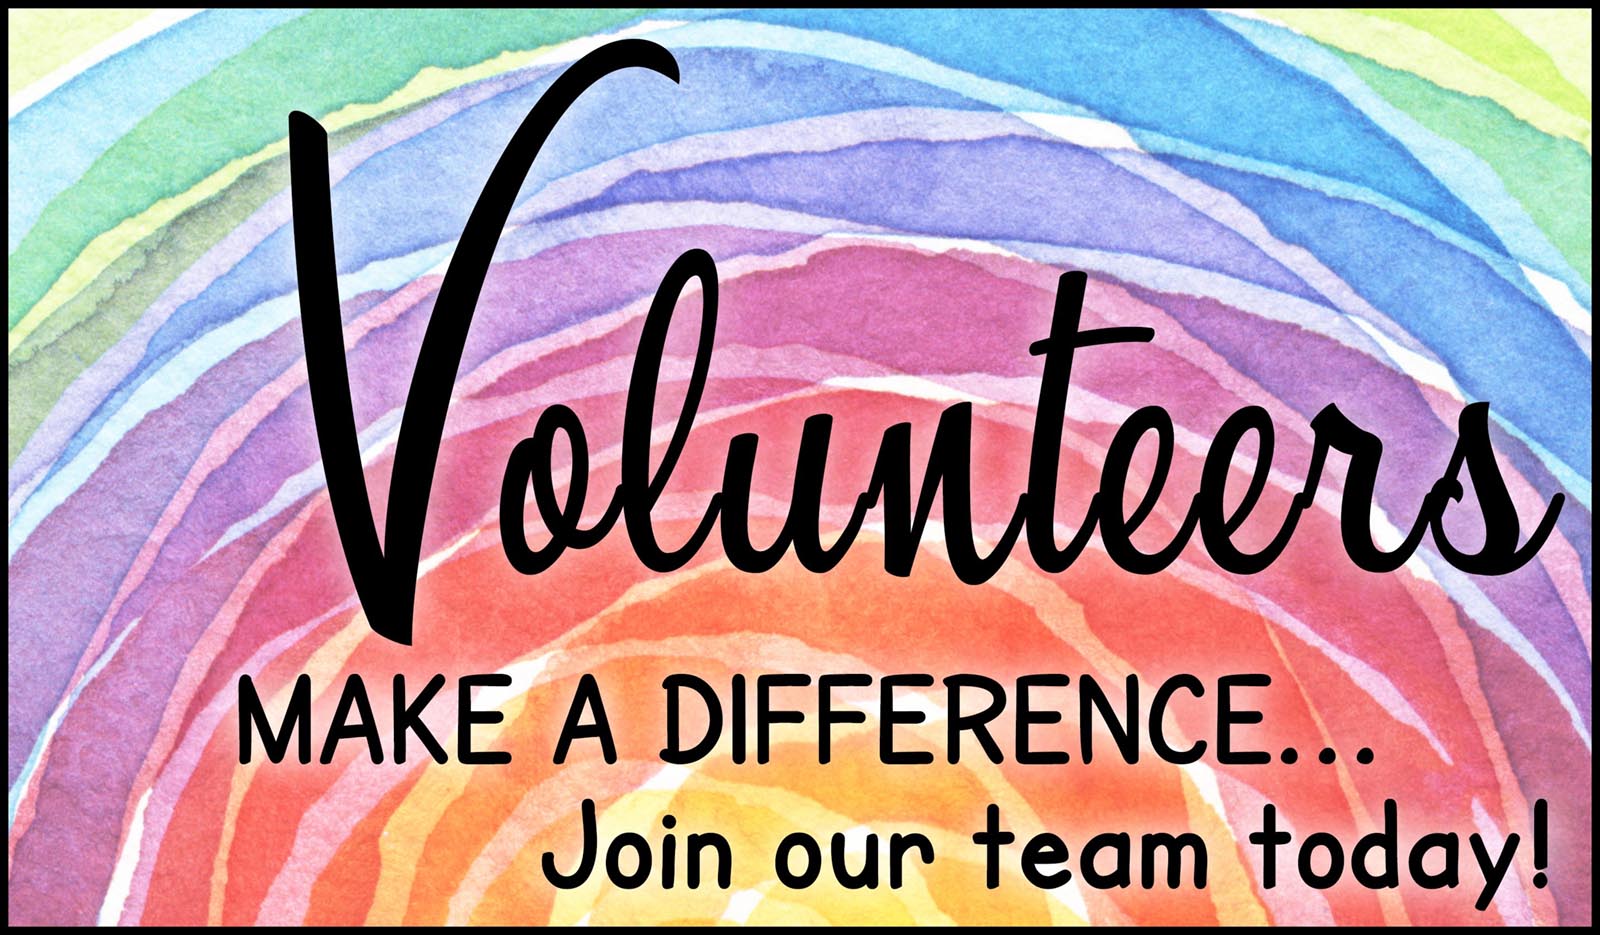 Volunteer for the NABC